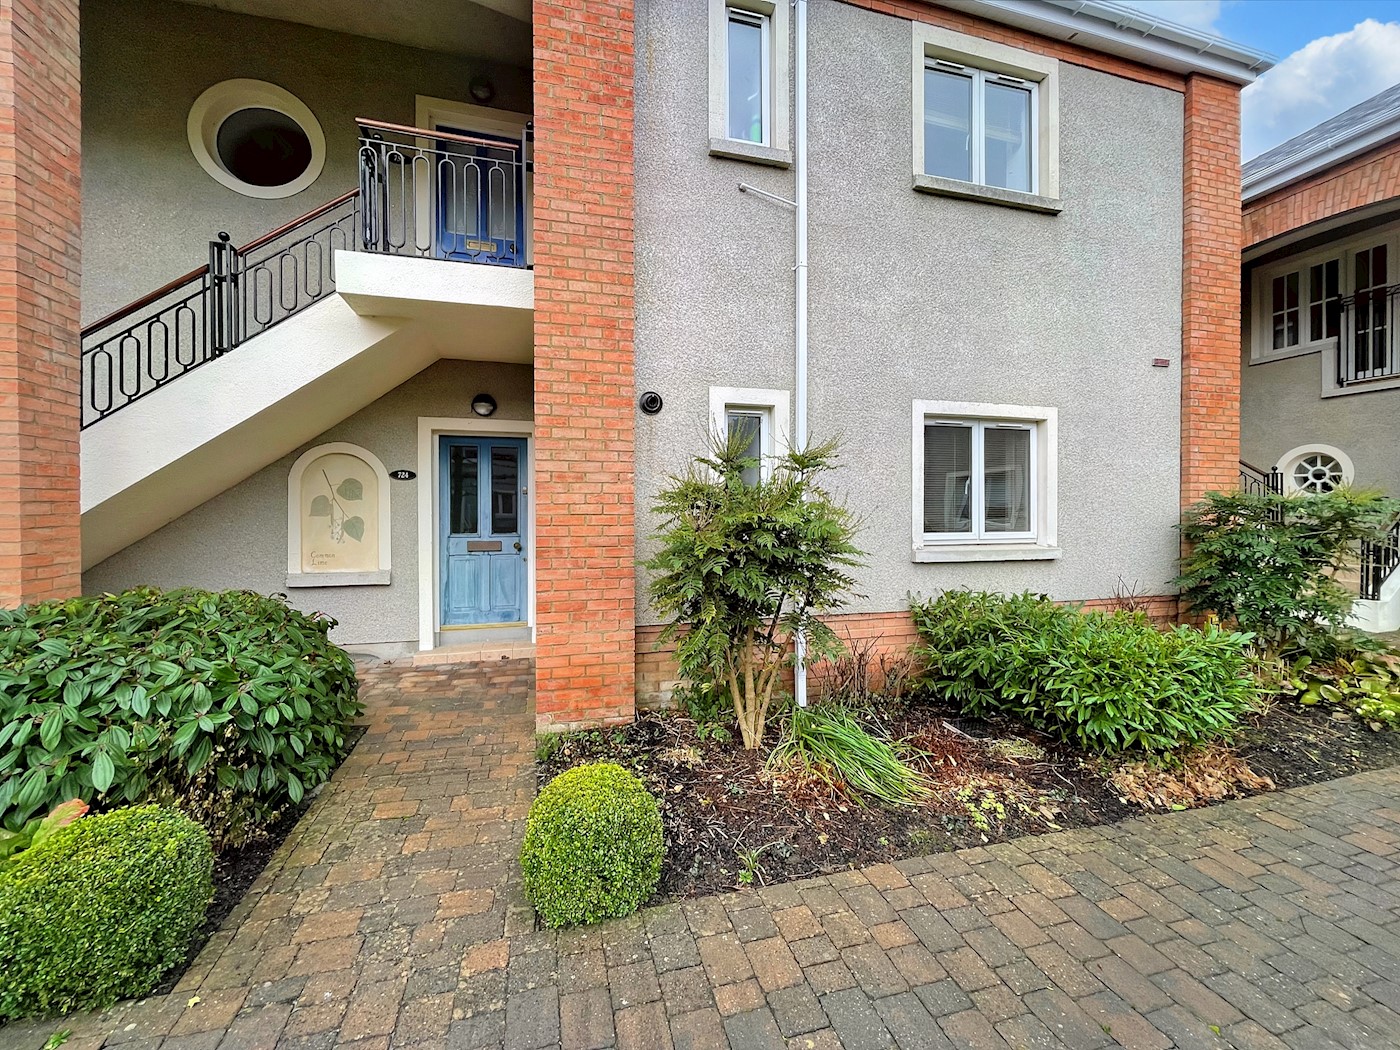 Apartment 724, Ryder Cup Village, The K Club, Straffan, Co. Kildare, W23 VY00 1/13